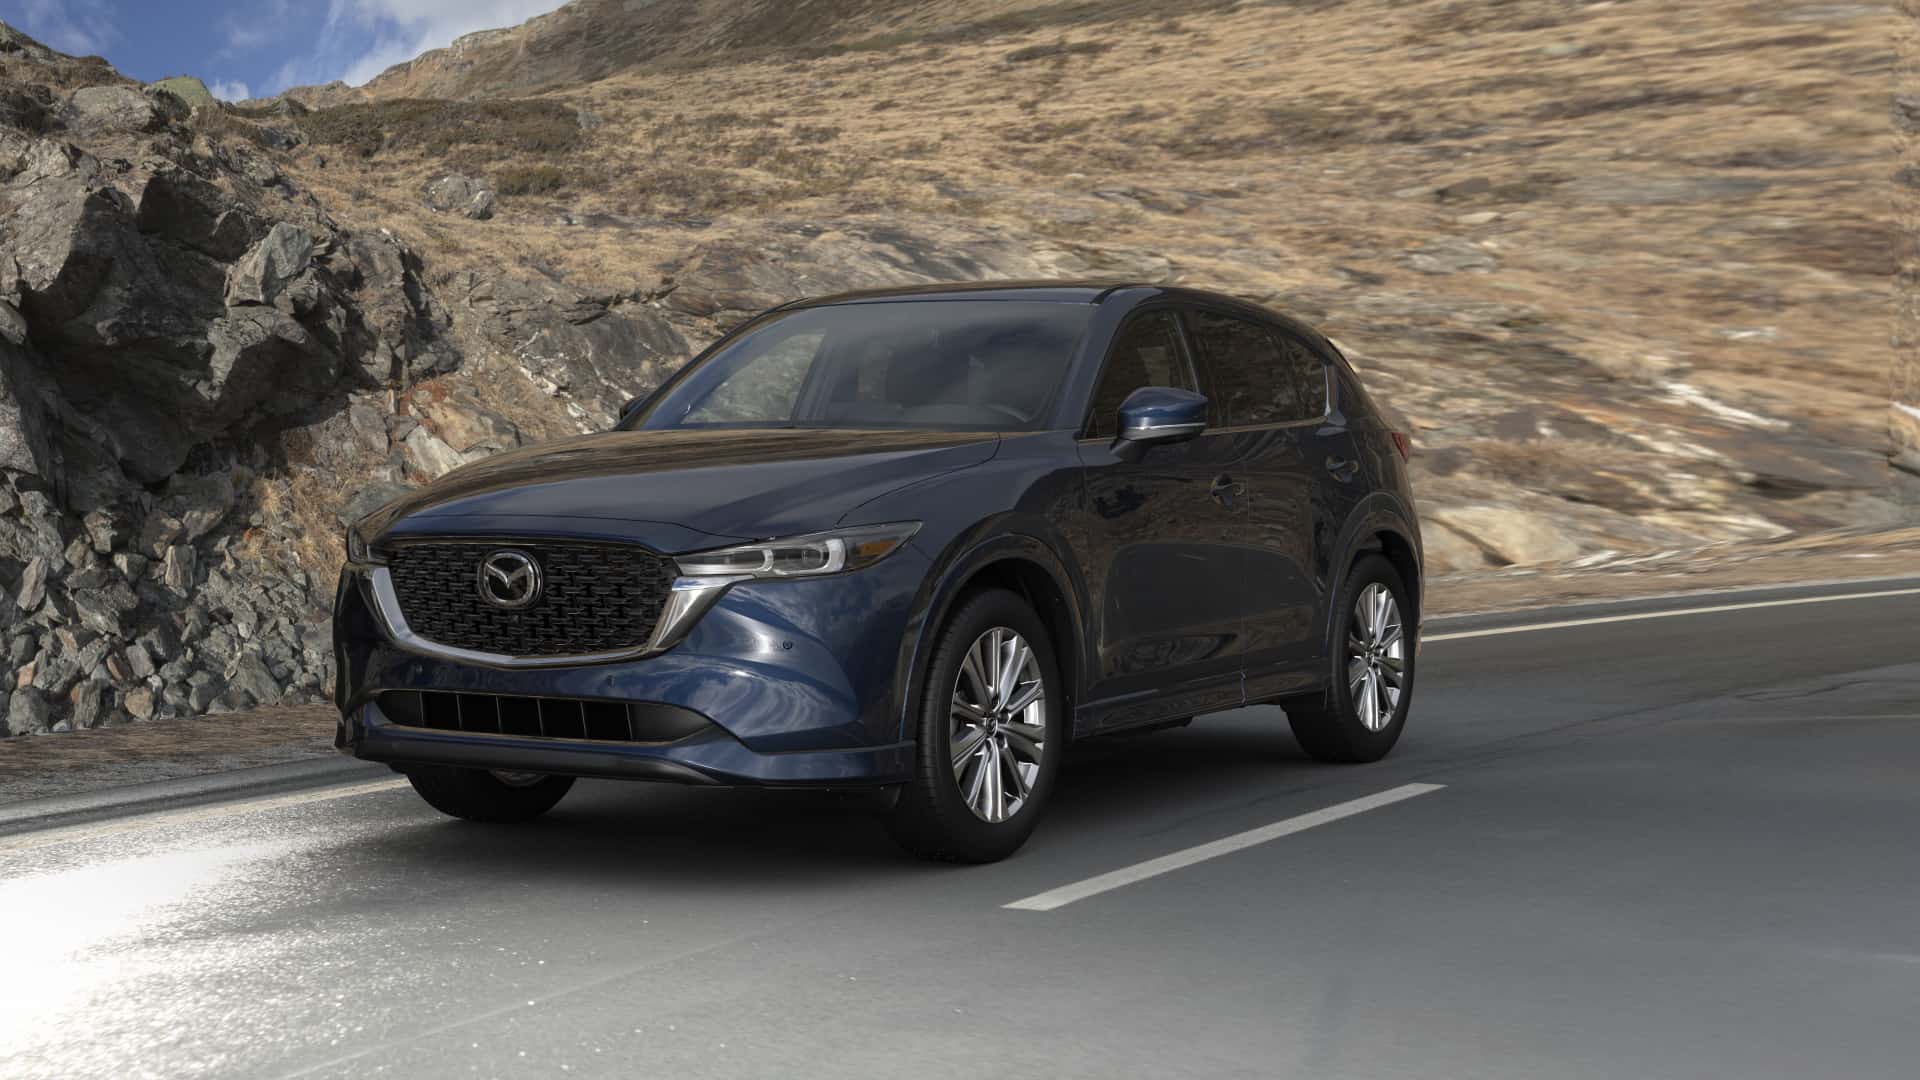 2023 Mazda CX-5 2.5 Turbo Signature Deep Crystal Blue Mica| Mazda of Milford in Milford CT